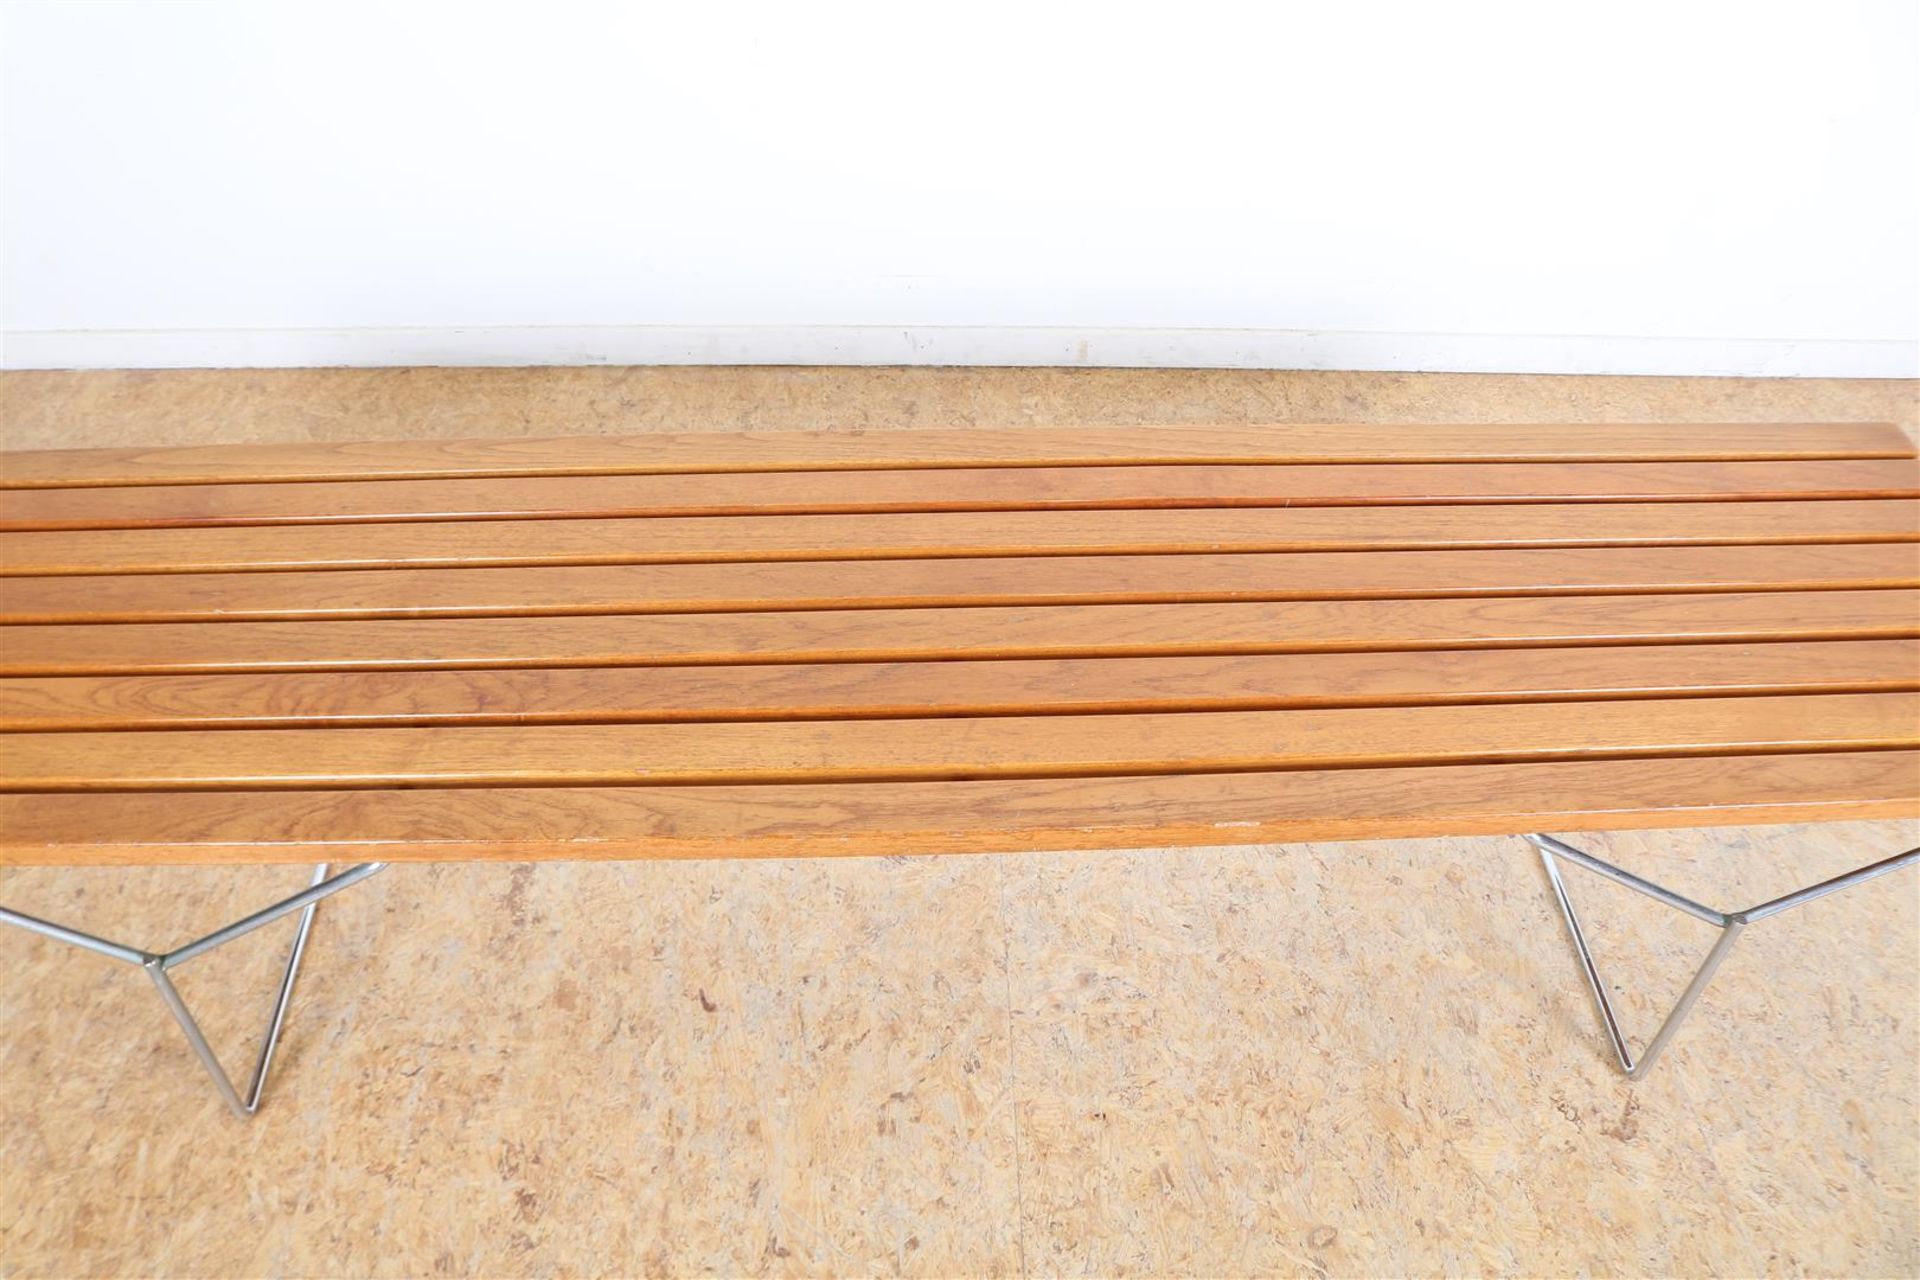 Design slatted bench with wooden oak seat on metal tubular frame legs, designed in 1952 by Harry - Image 2 of 4